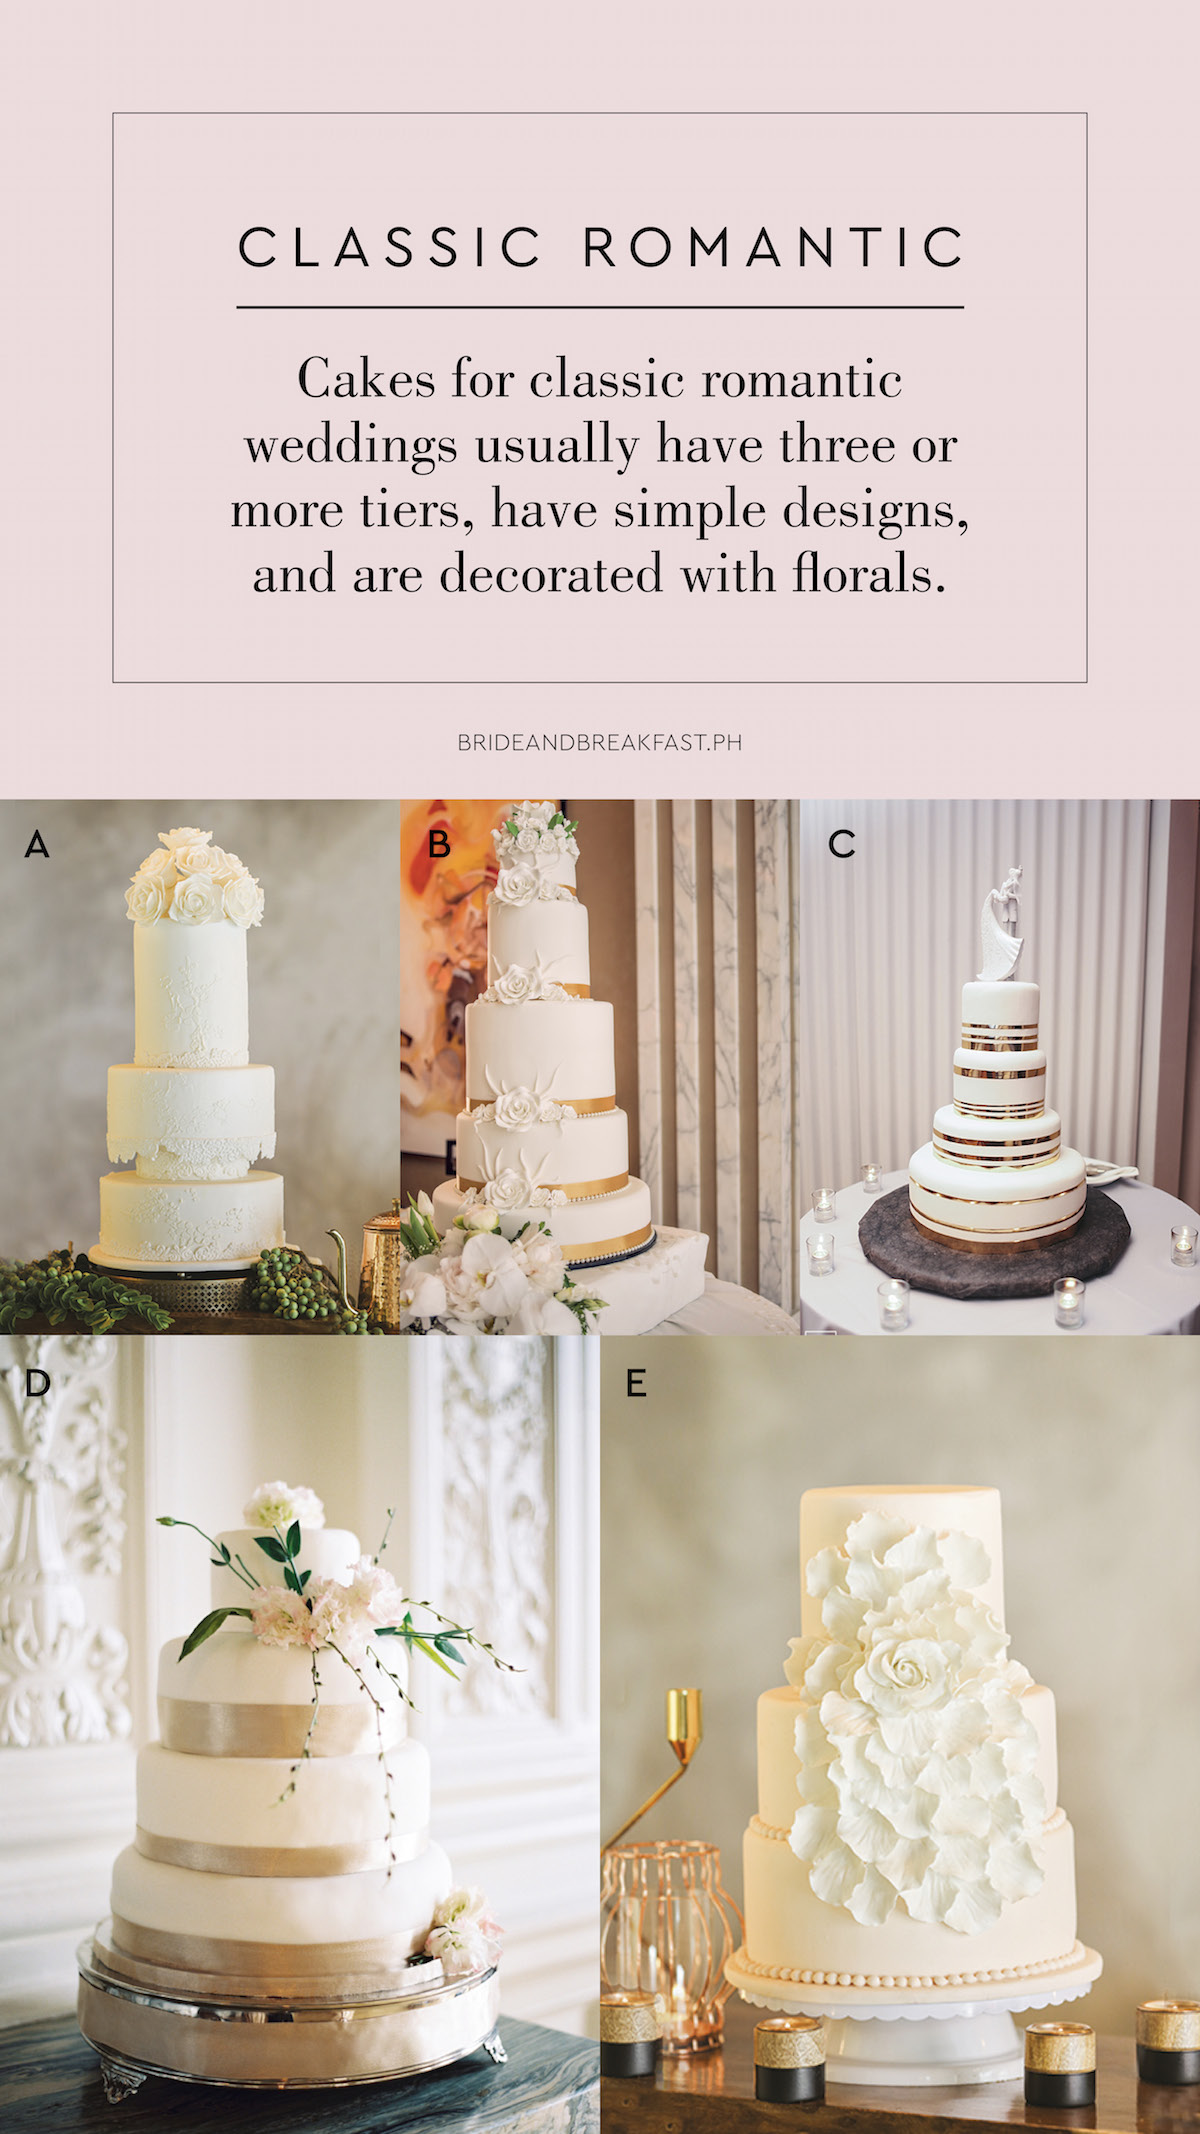 CLASSIC ROMANTIC Cakes for classic romantic weddings usually have three or more tiers, have simple designs, and are decorated with florals.